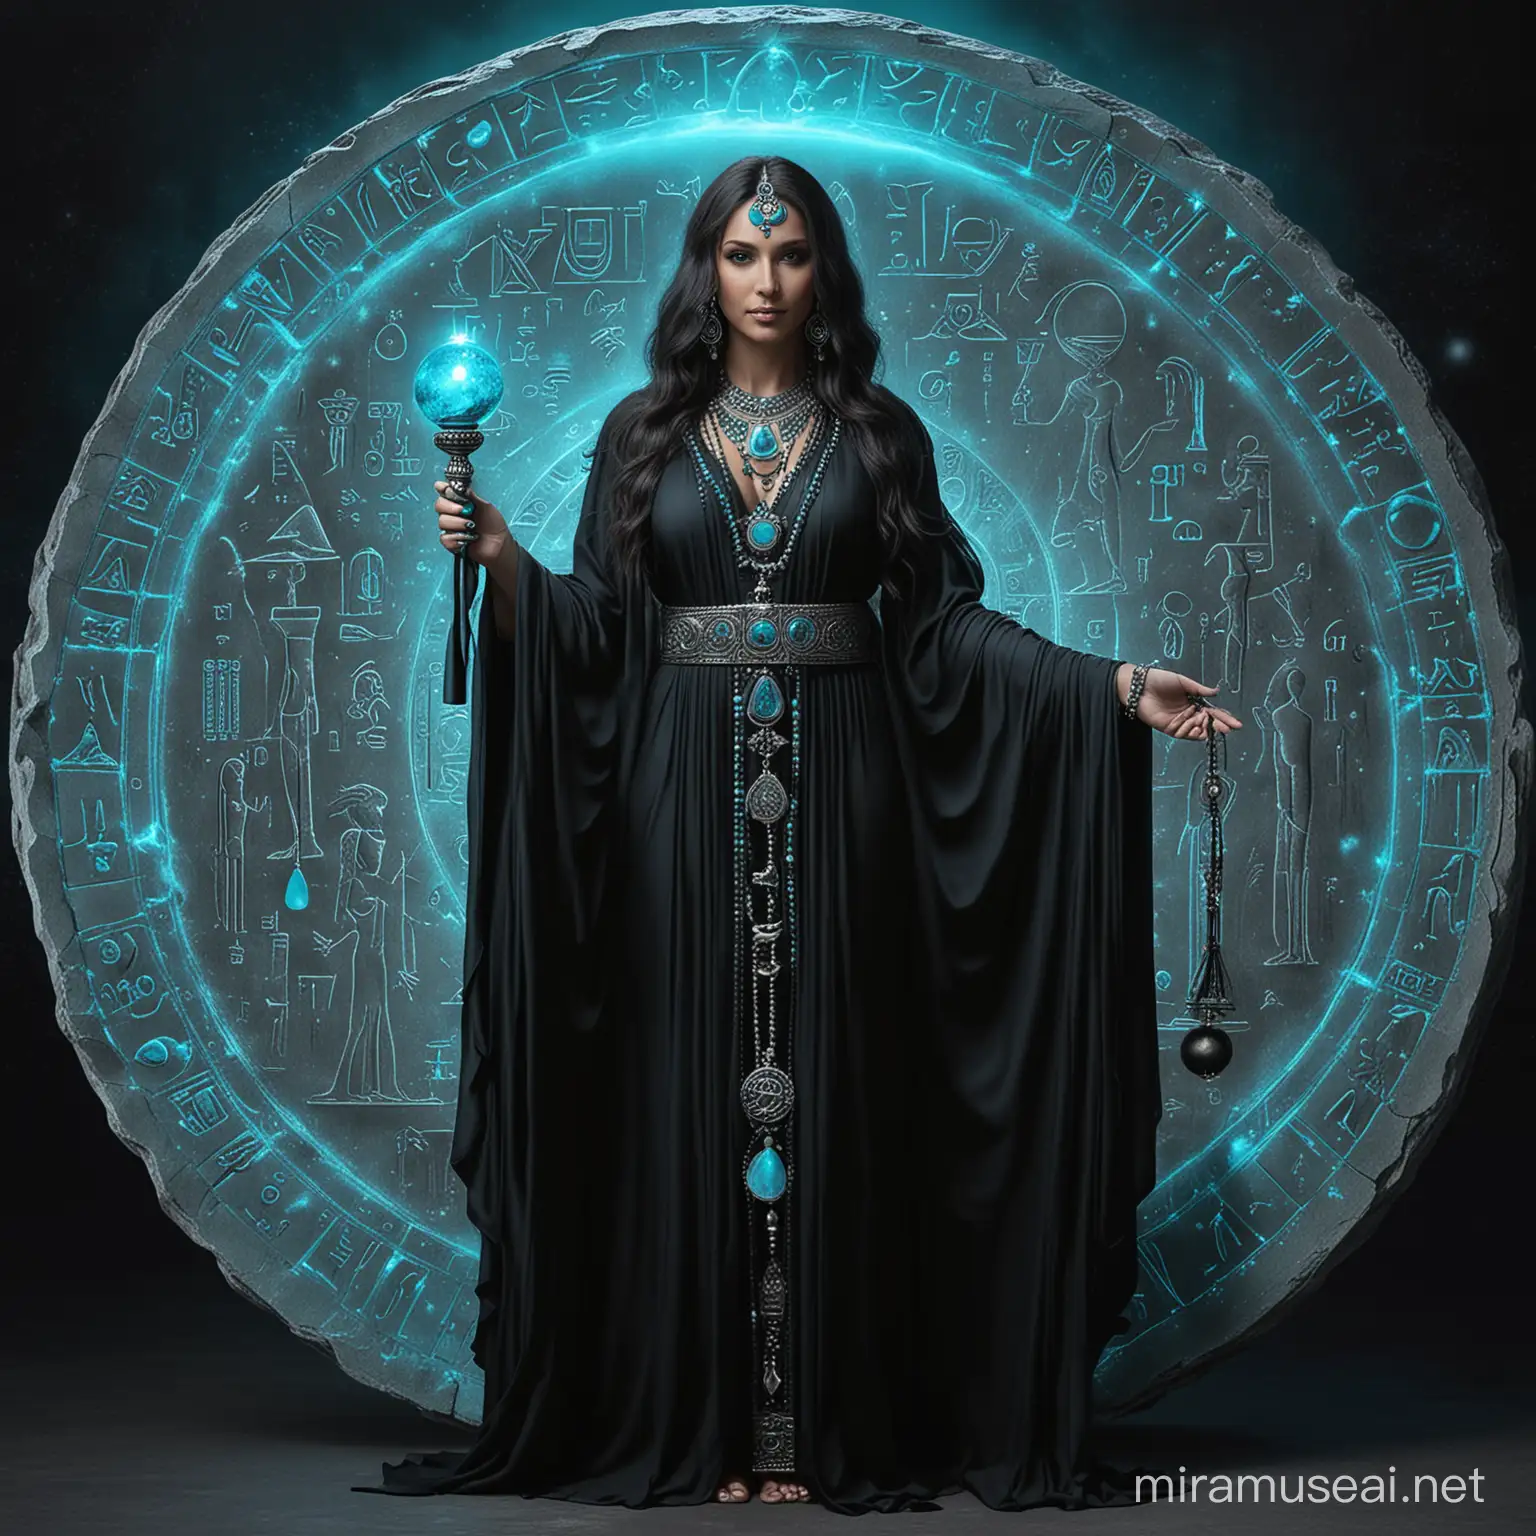 Enigmatic Dark Magic Goddess with Turquoise Orb